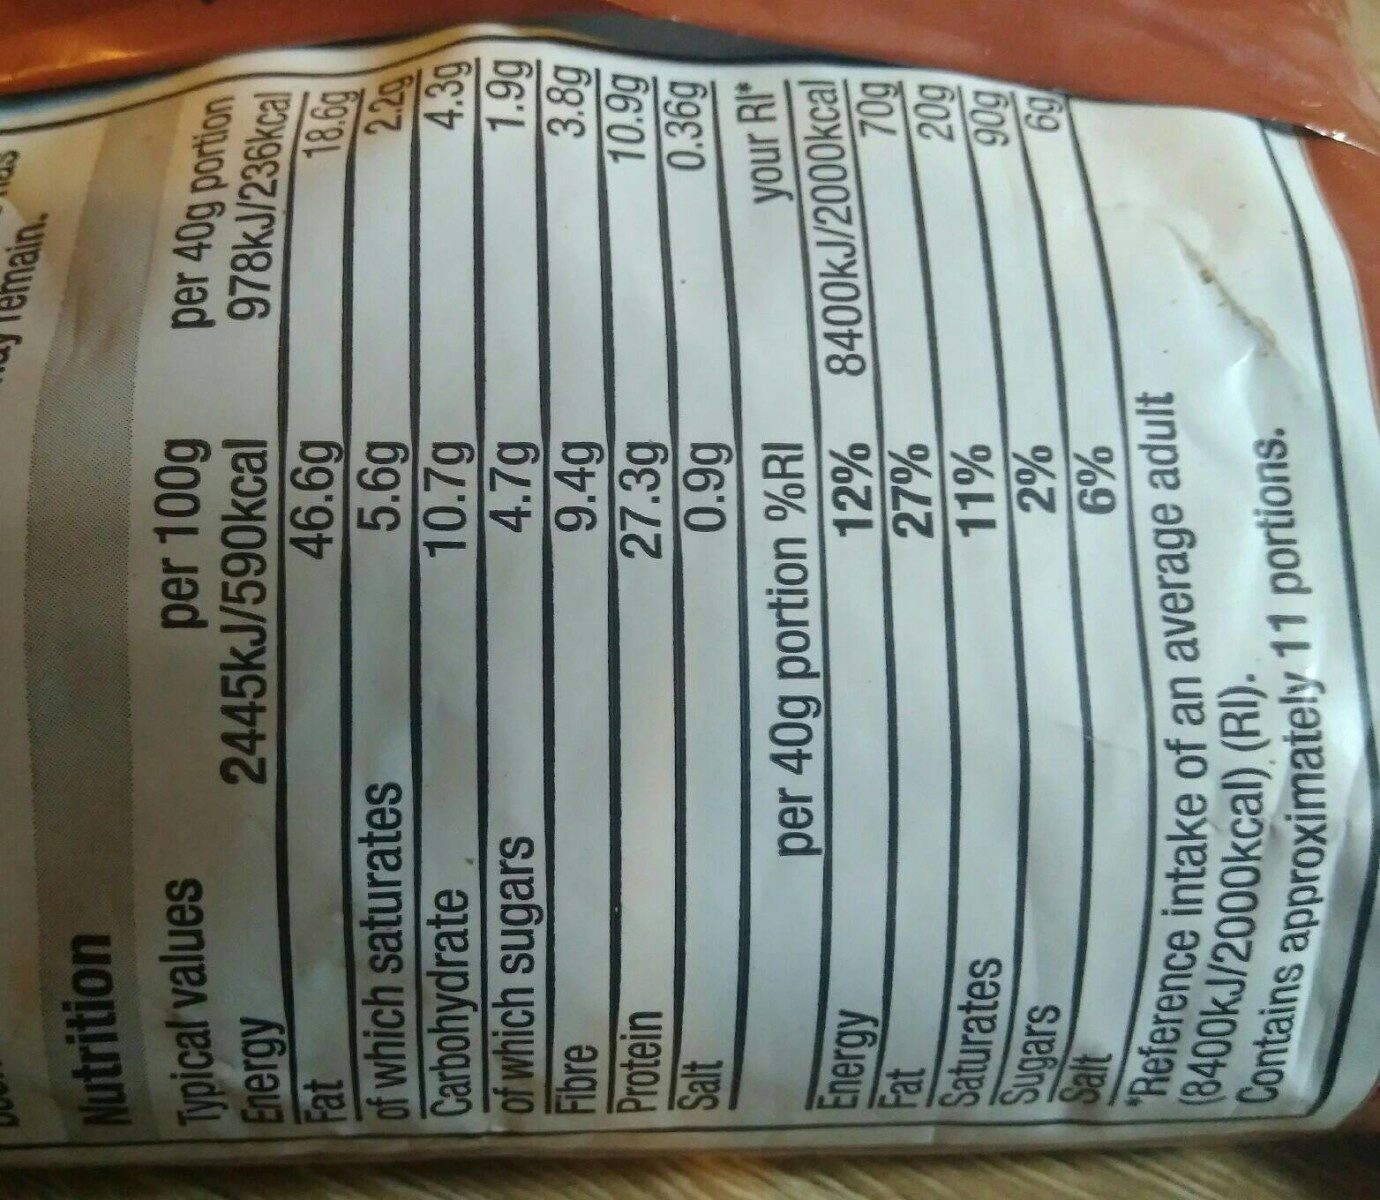 Dry Roasted Peanuts - Nutrition facts